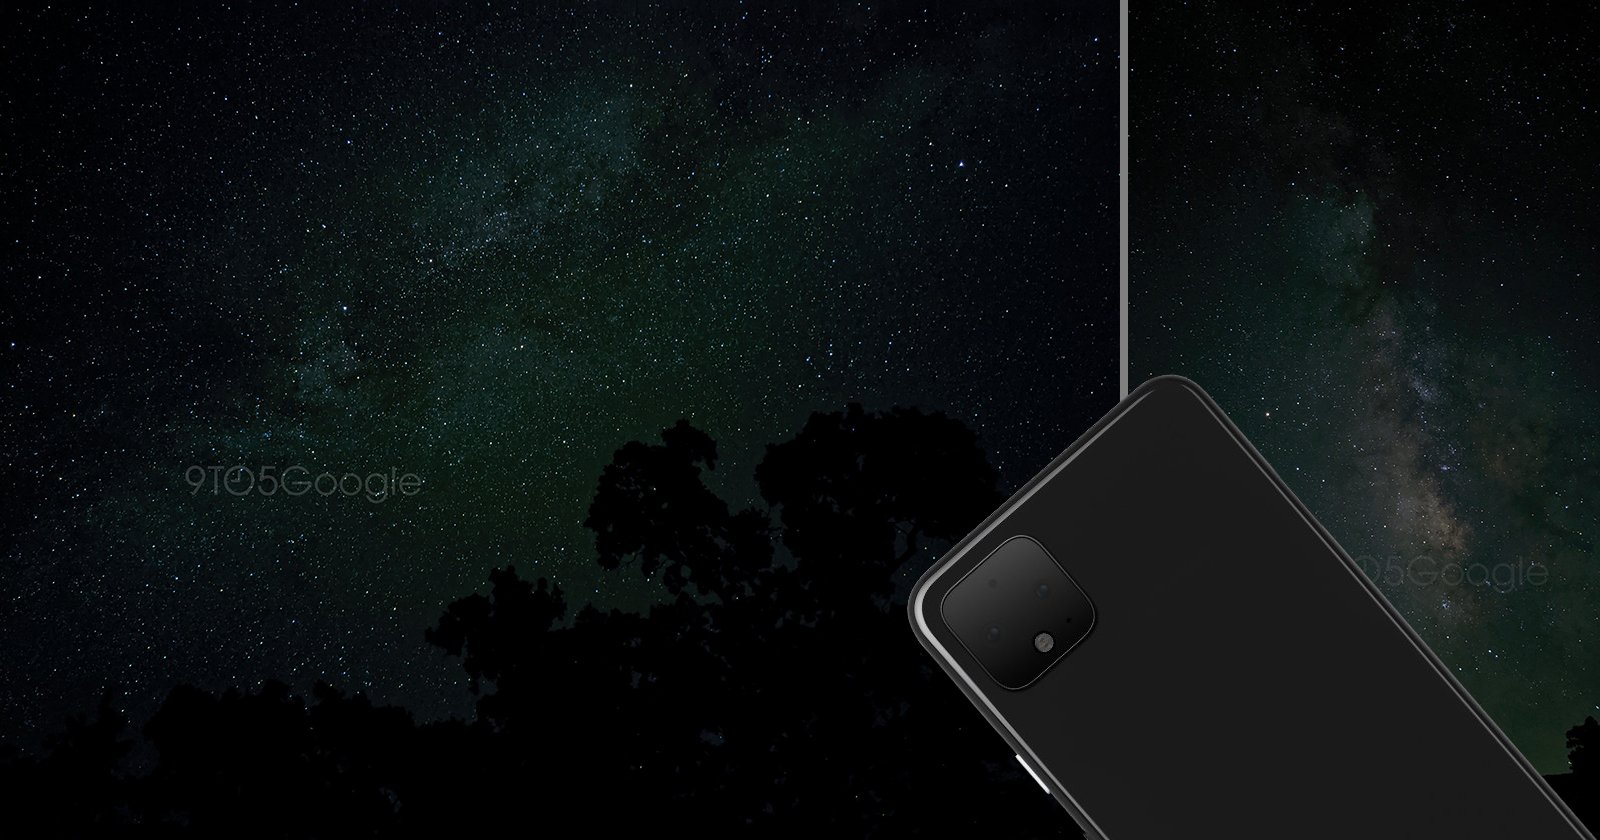 These Leaked Photos were Taken with the Google Pixel 4s Astrophotography Mode